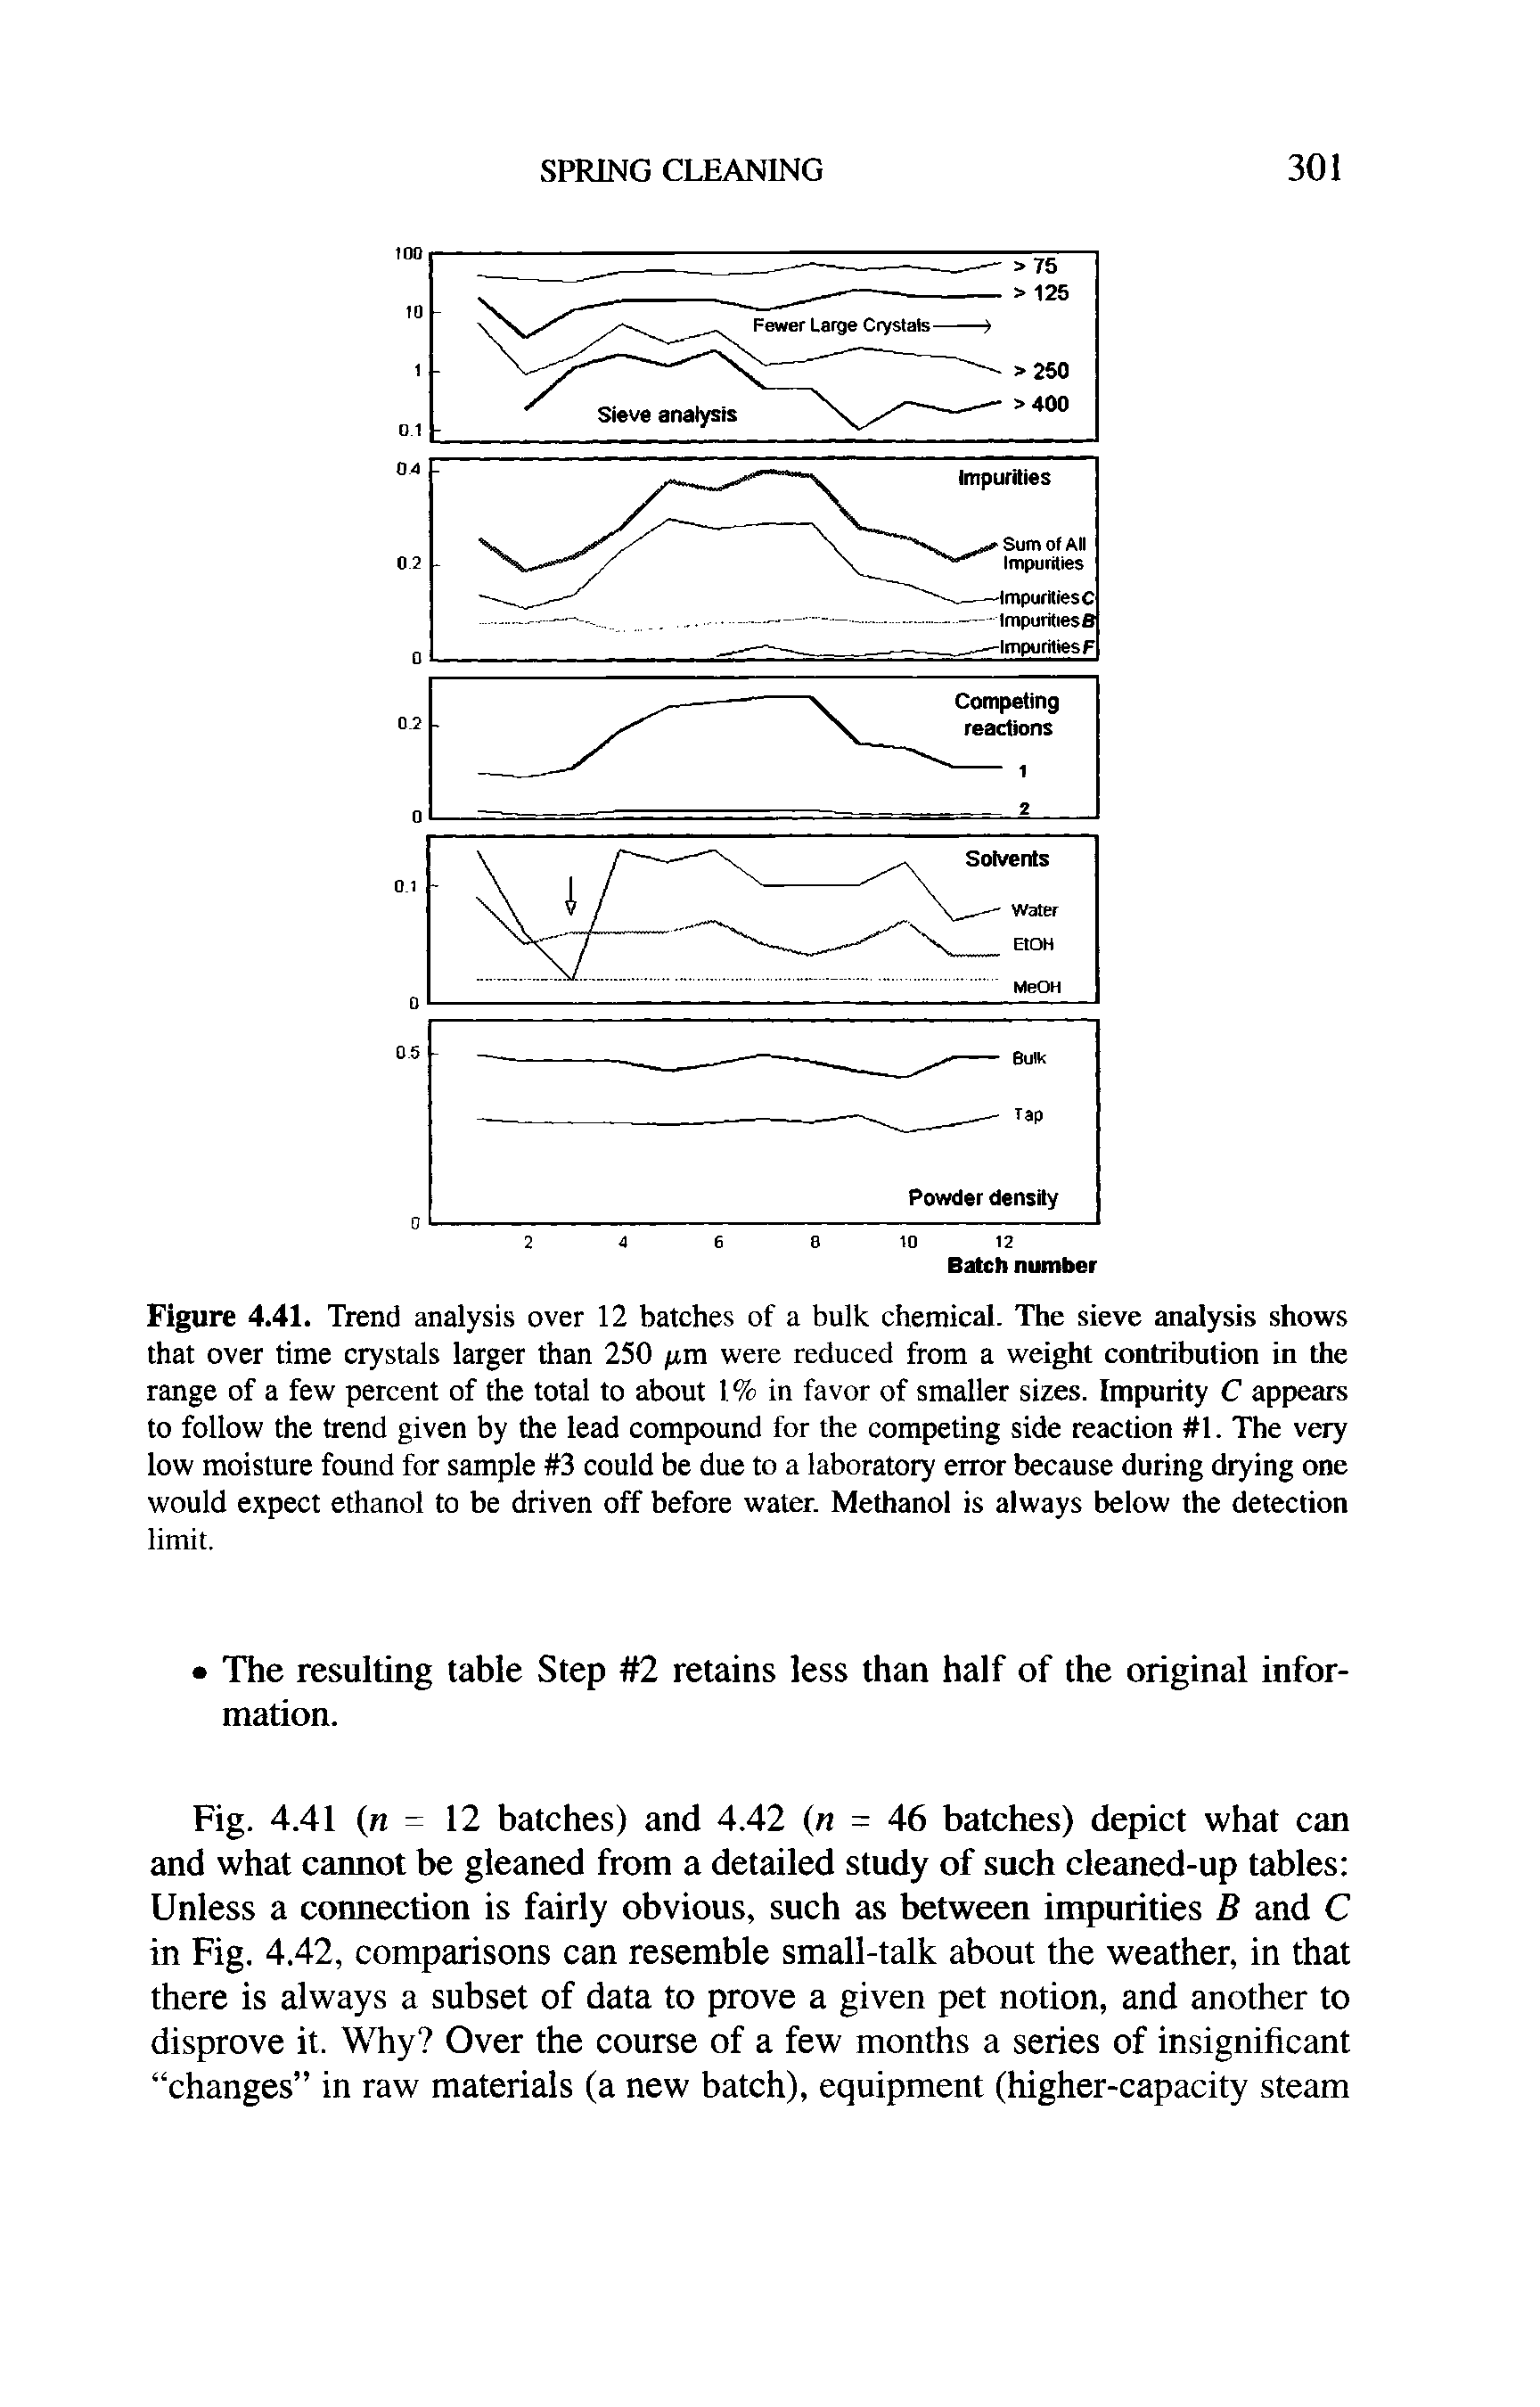 Figure 4.41. Trend analysis over 12 batches of a bulk chemical. The sieve analysis shows that over time crystals larger than 250 /urn were reduced from a weight contribution in the range of a few percent of the total to about 1% in favor of smaller sizes. Impurity C appears to follow the trend given by the lead compound for the competing side reaction 1. The very low moisture found for sample 3 could be due to a laboratory error because during drying one would expect ethanol to be driven off before water. Methanol is always below the detection limit.